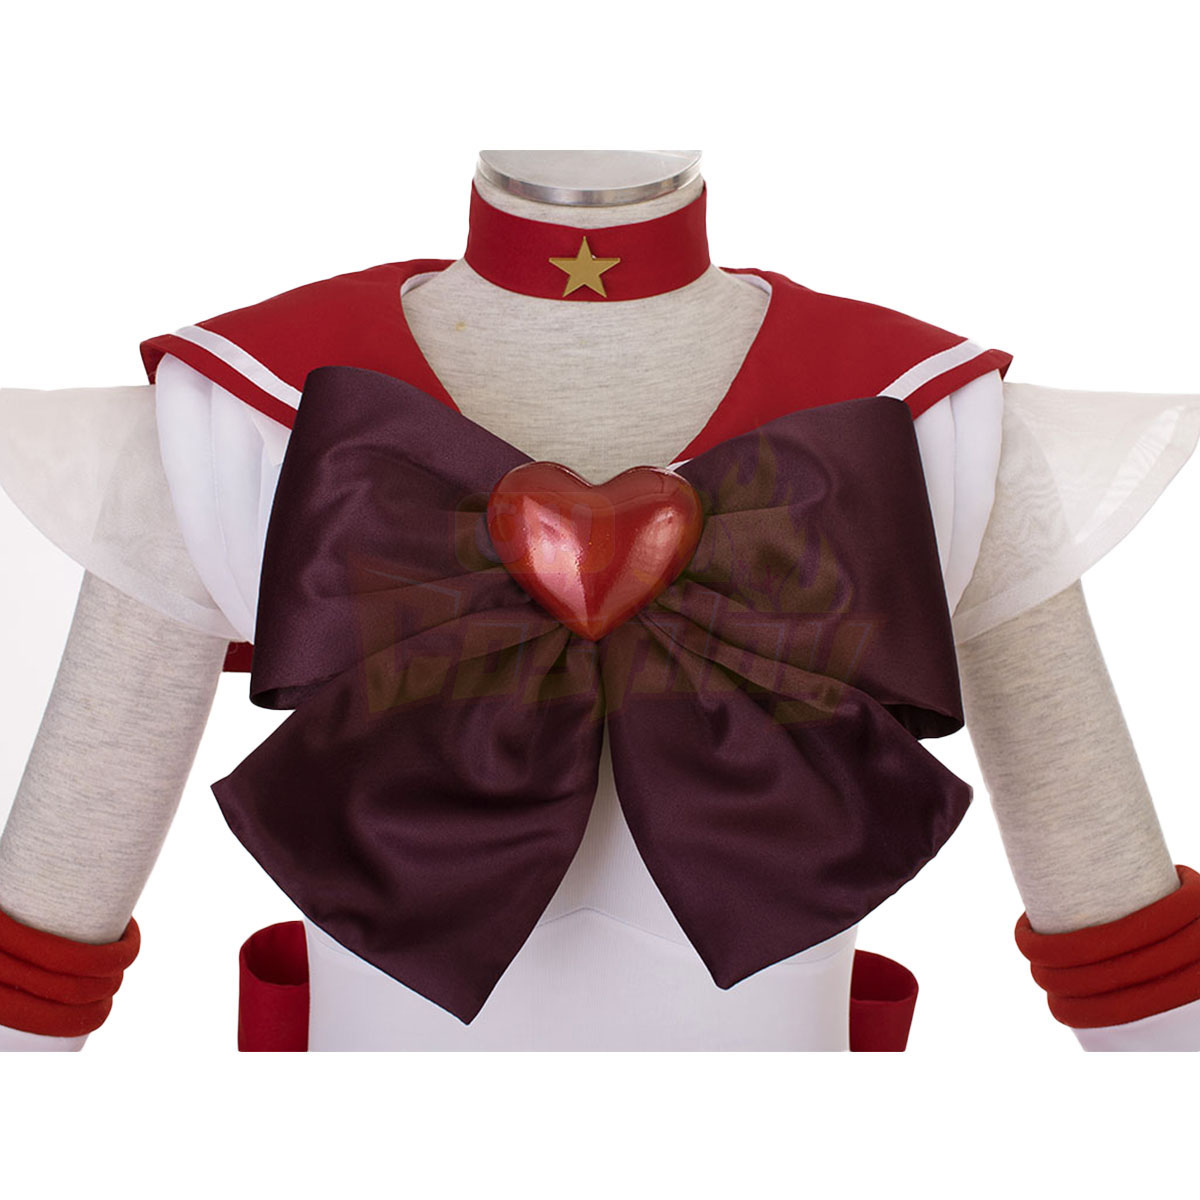 Sailor Moon Hino Rei 3RD Cosplay Costumes Deluxe Edition